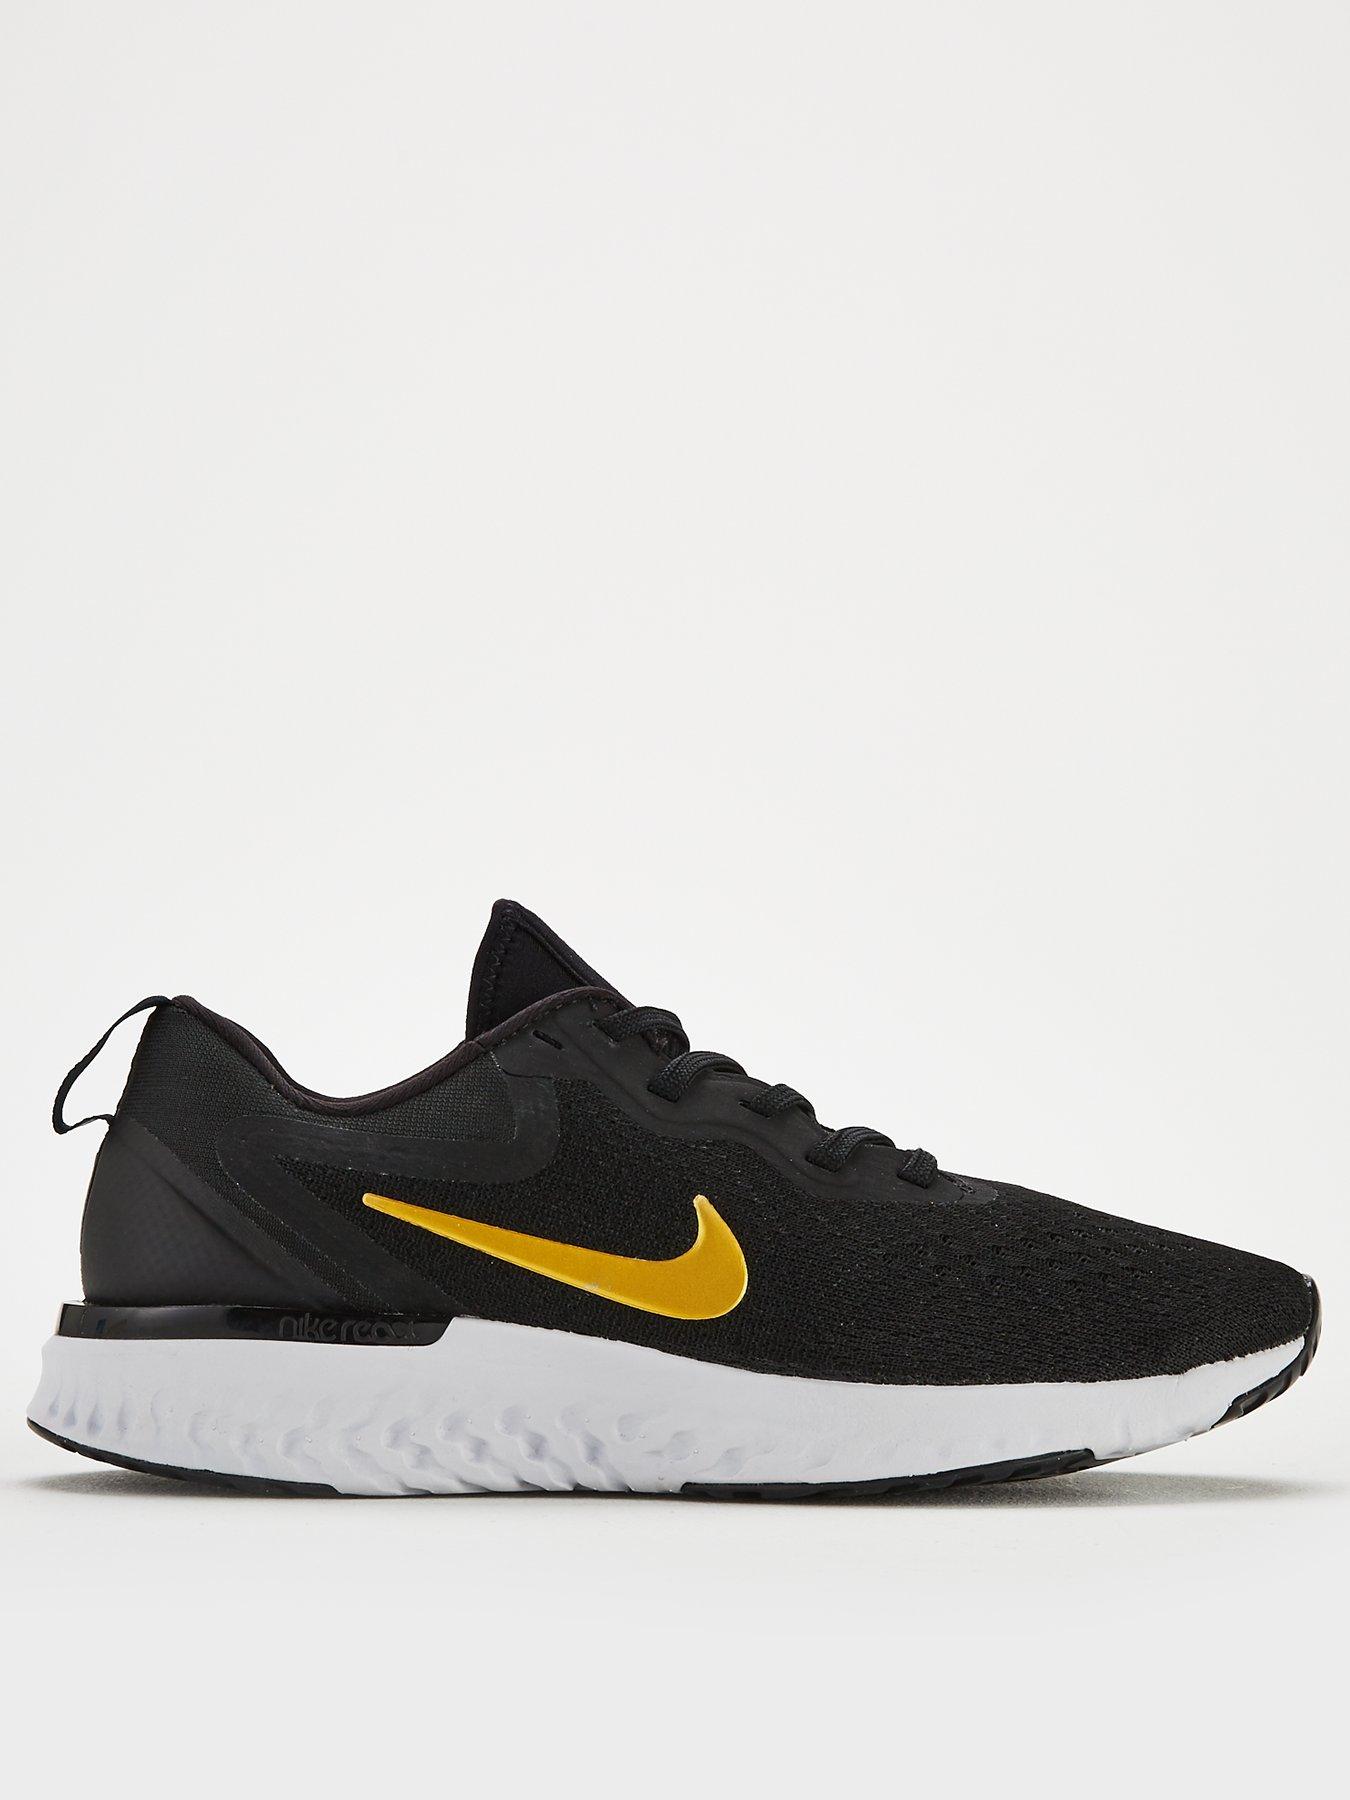 nike odyssey react women's black and gold